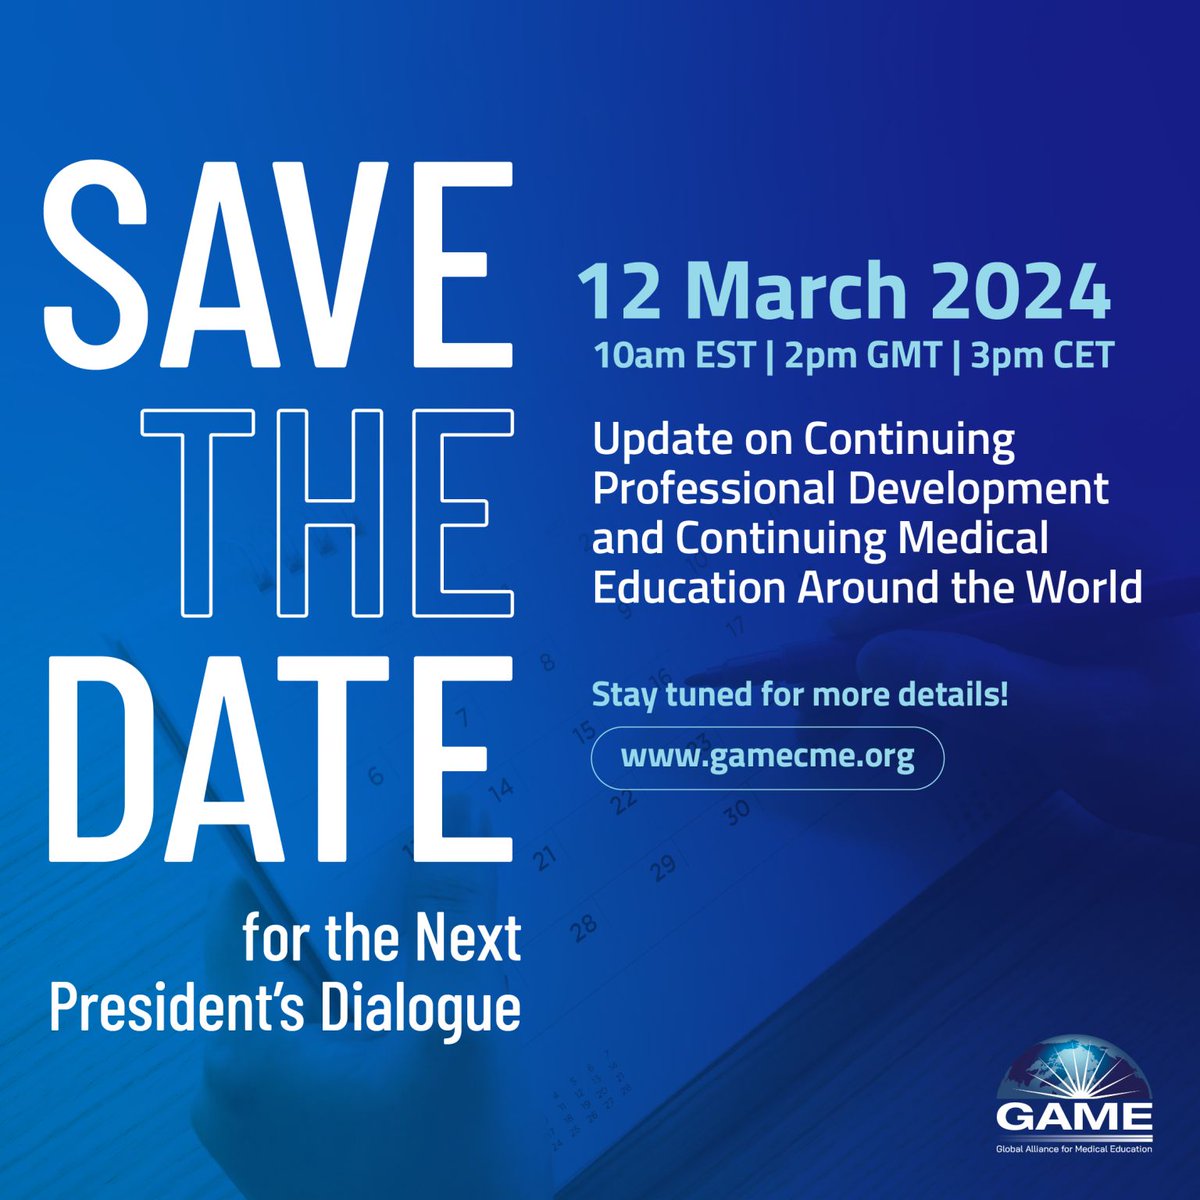 Join GAME President Eva Thalmann & a panel of healthcare experts for an update on #CPD & #CME around the world. 12 March 2024 at 3 pm CET, 1 pm GMT, and 10 am EDT Save the date & stay tuned for more details! #GAMEcme #medicaleducation #healthcare #lifelonglearning